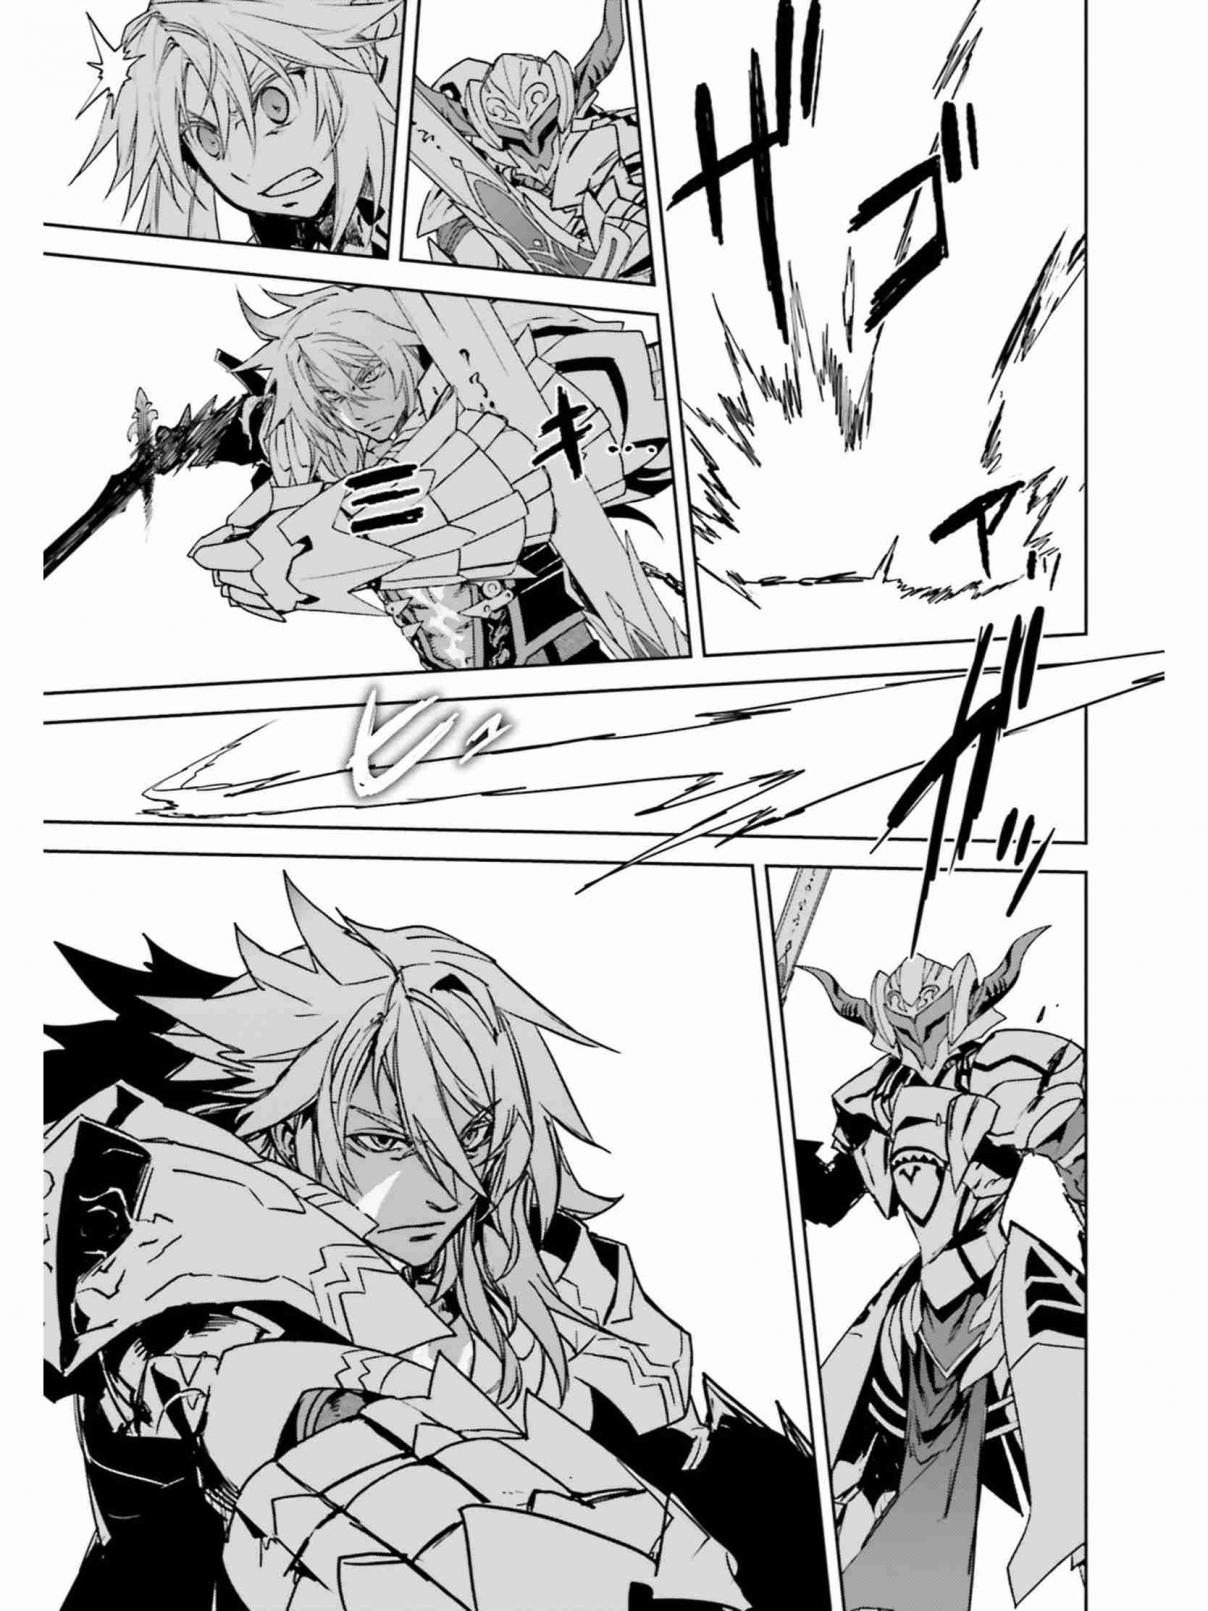 Fate/Apocrypha Ch. 25 Episode